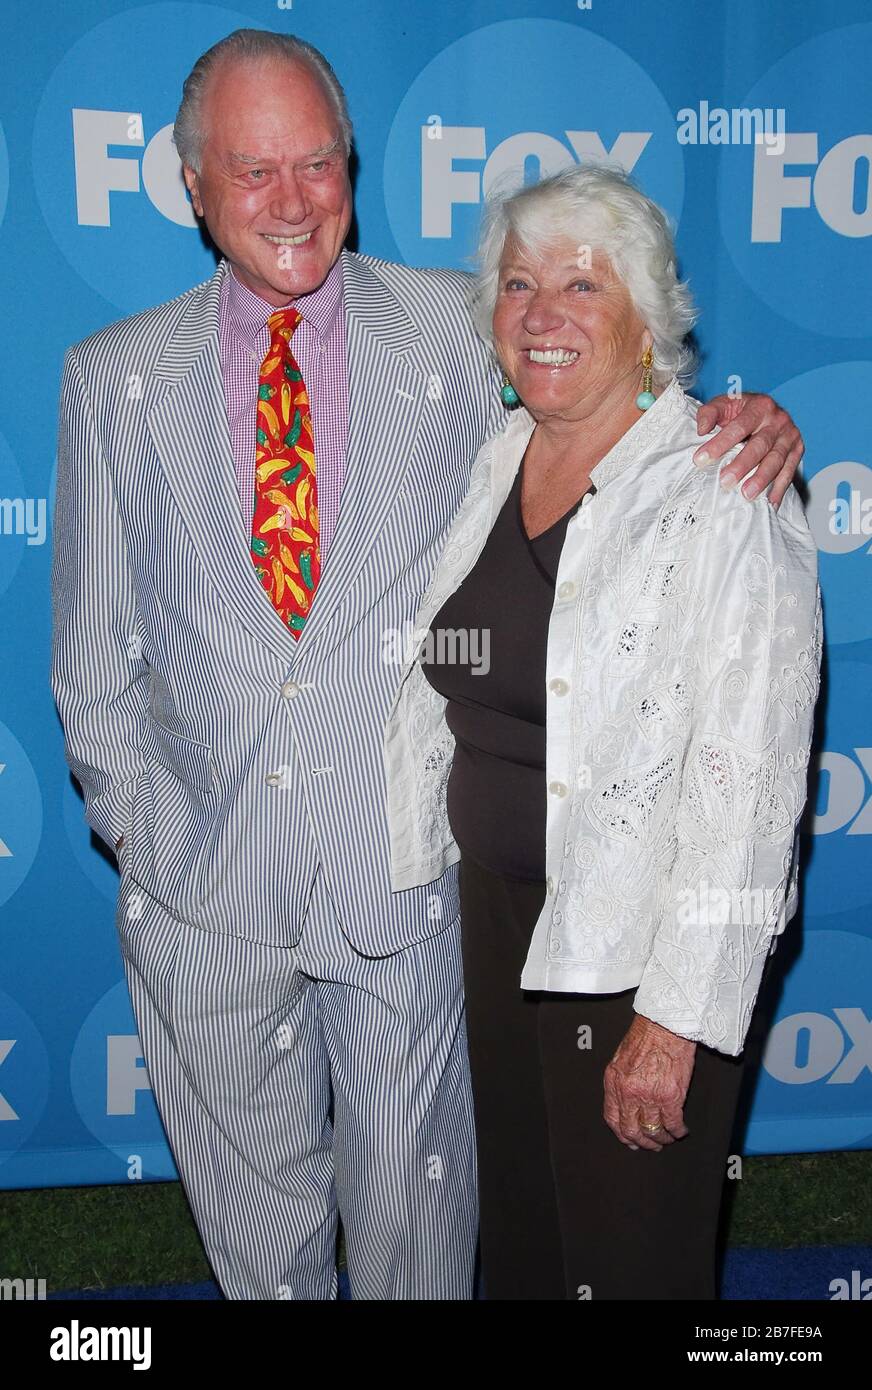 Larry Hagman and Maj Axelsson at the FOX 2006 Summer TCA All Star Party held at the Ritz Carlton Huntington Hotel, Horseshoe Garden in Pasadena, CA. The event took place on Tuesday, July 25, 2006.  Photo by: SBM / PictureLux Stock Photo